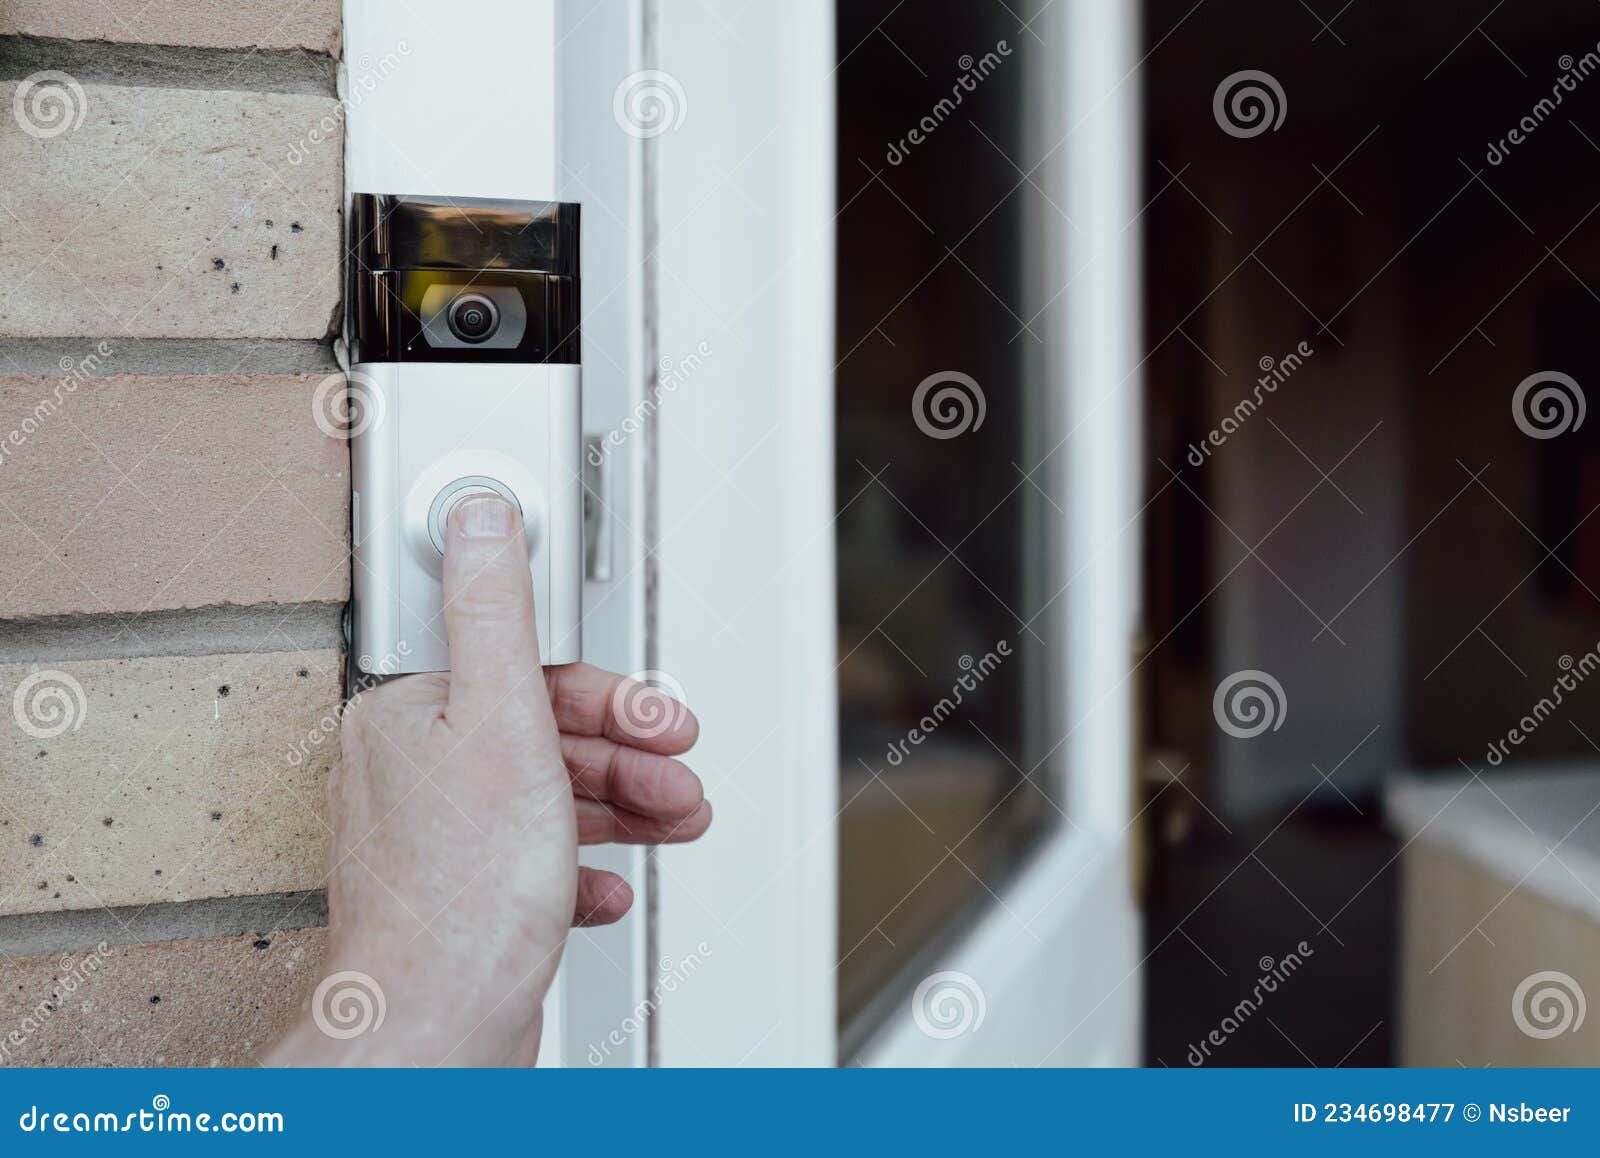 shallow focus of a homeowner seen testing a newly installed wifi smart doorbell.